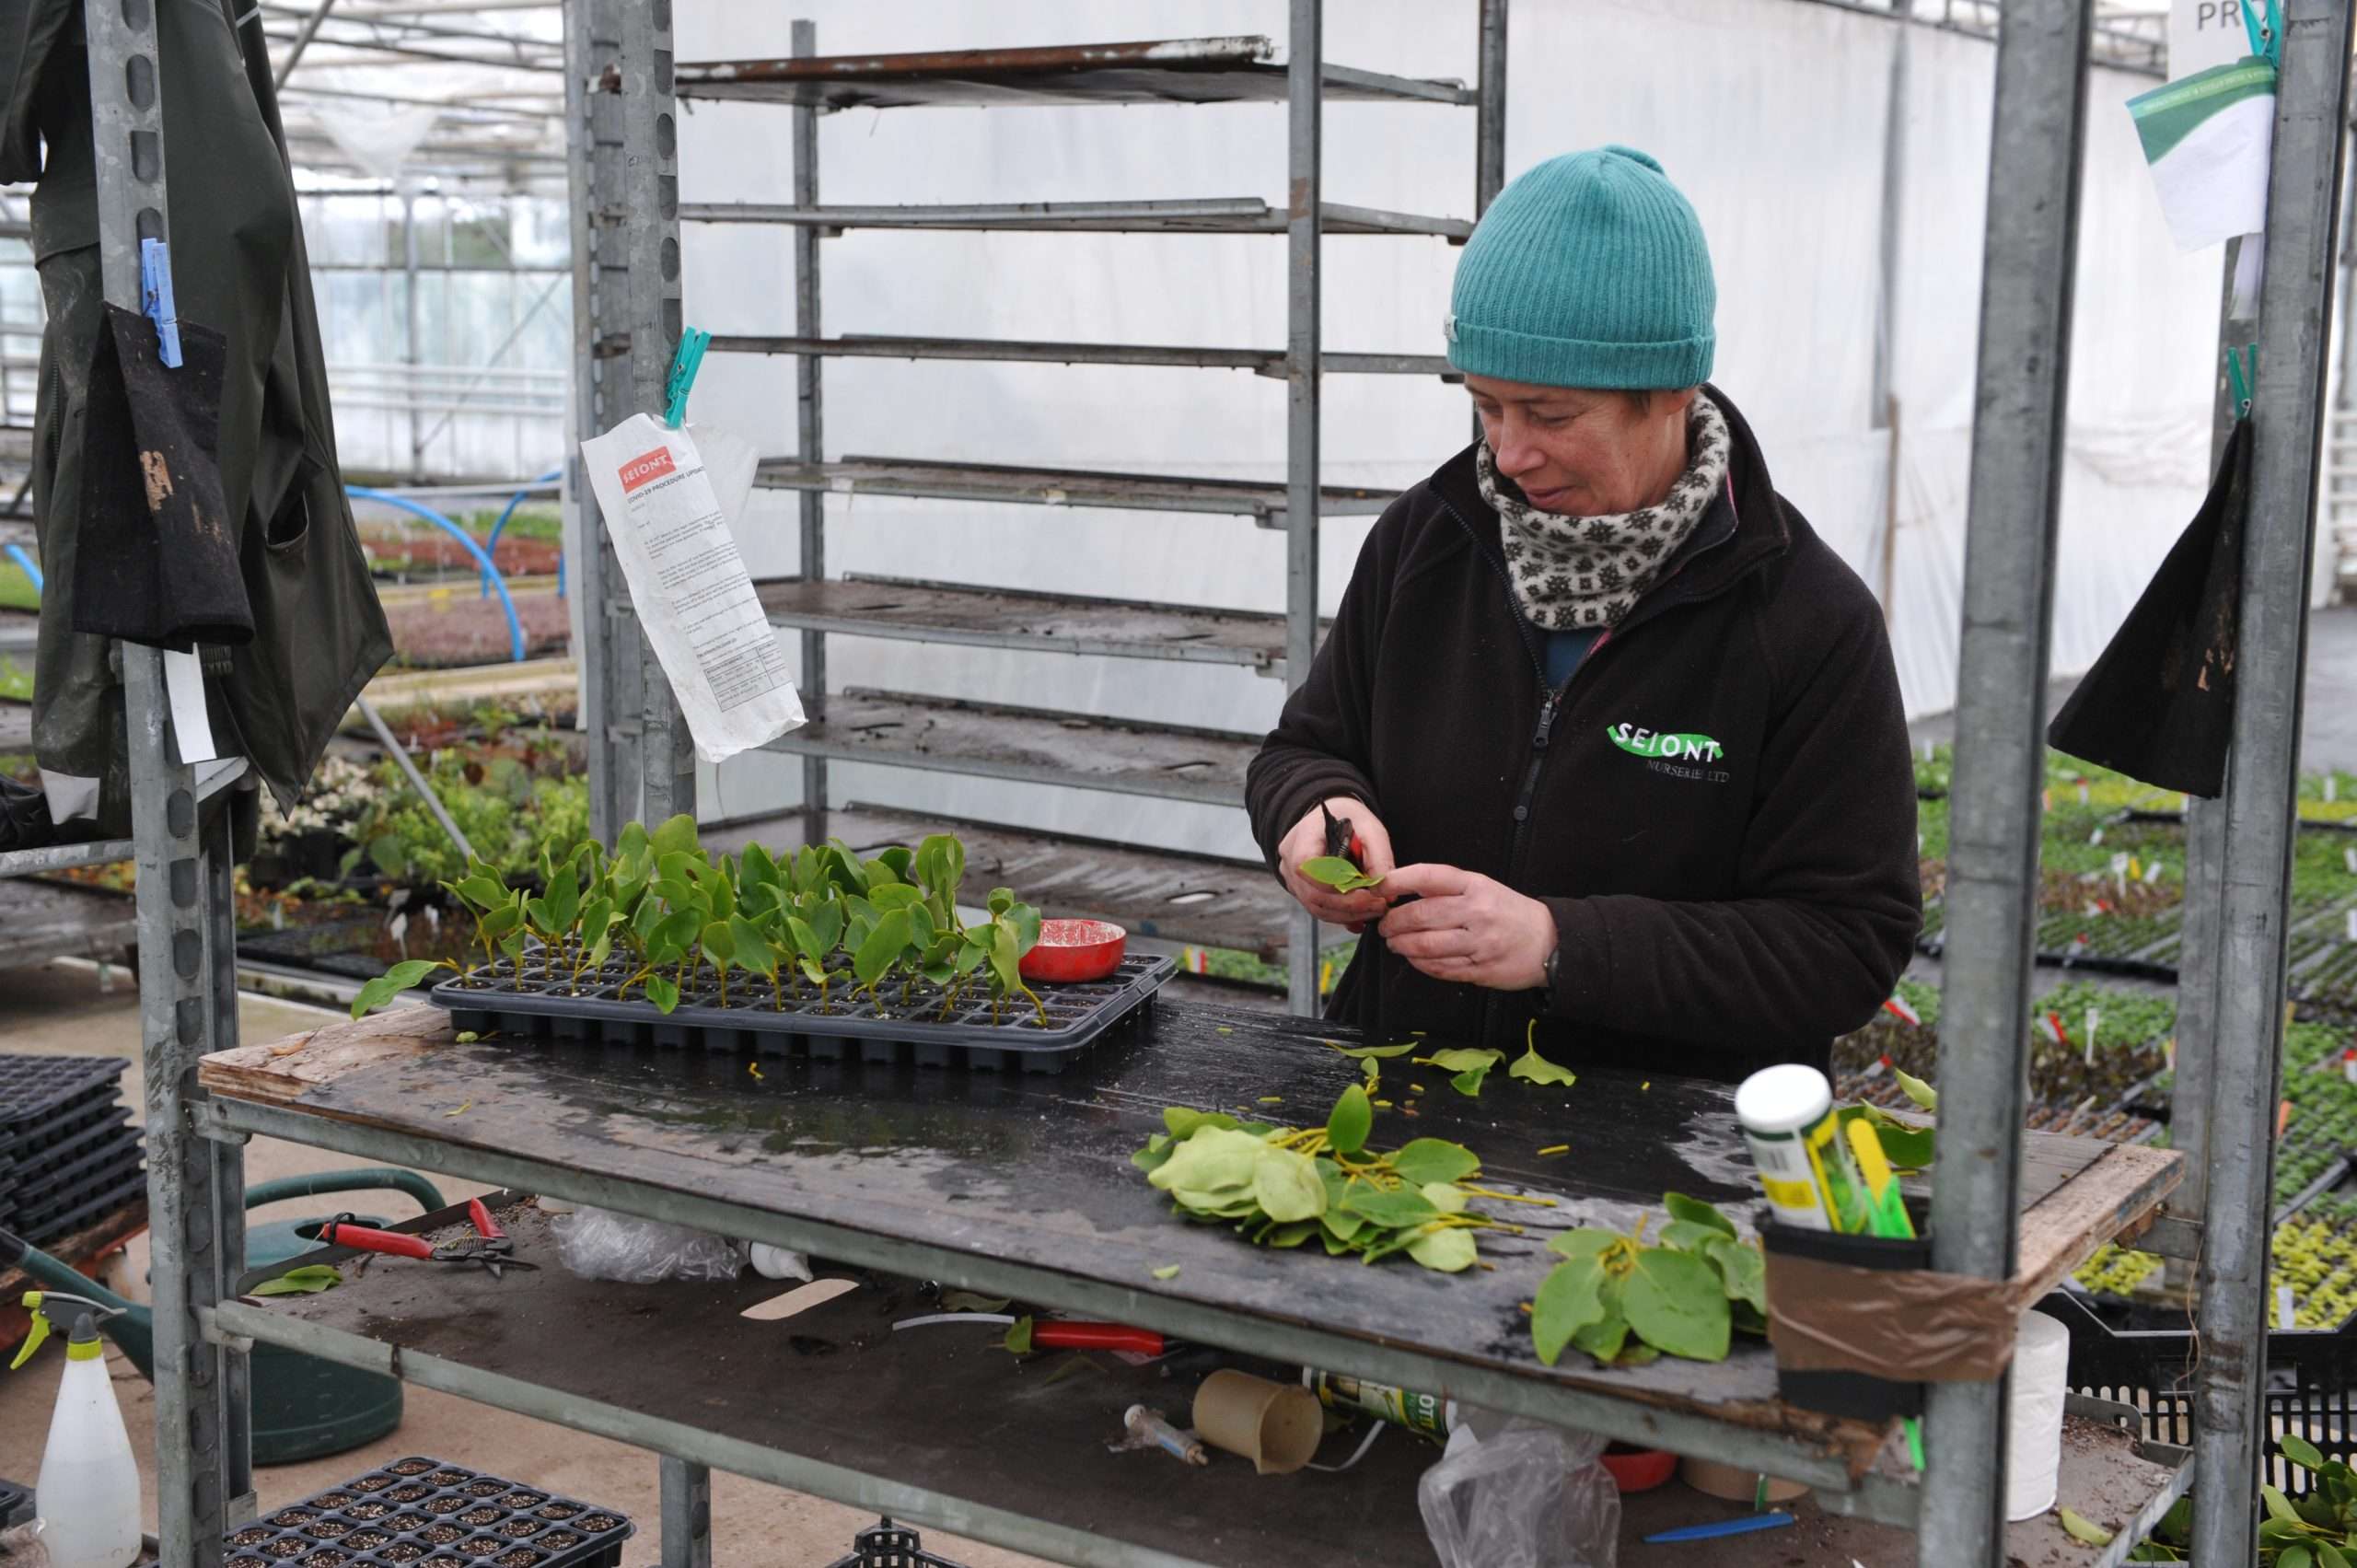 Farming Connect skills courses key to staff development at horticulture business